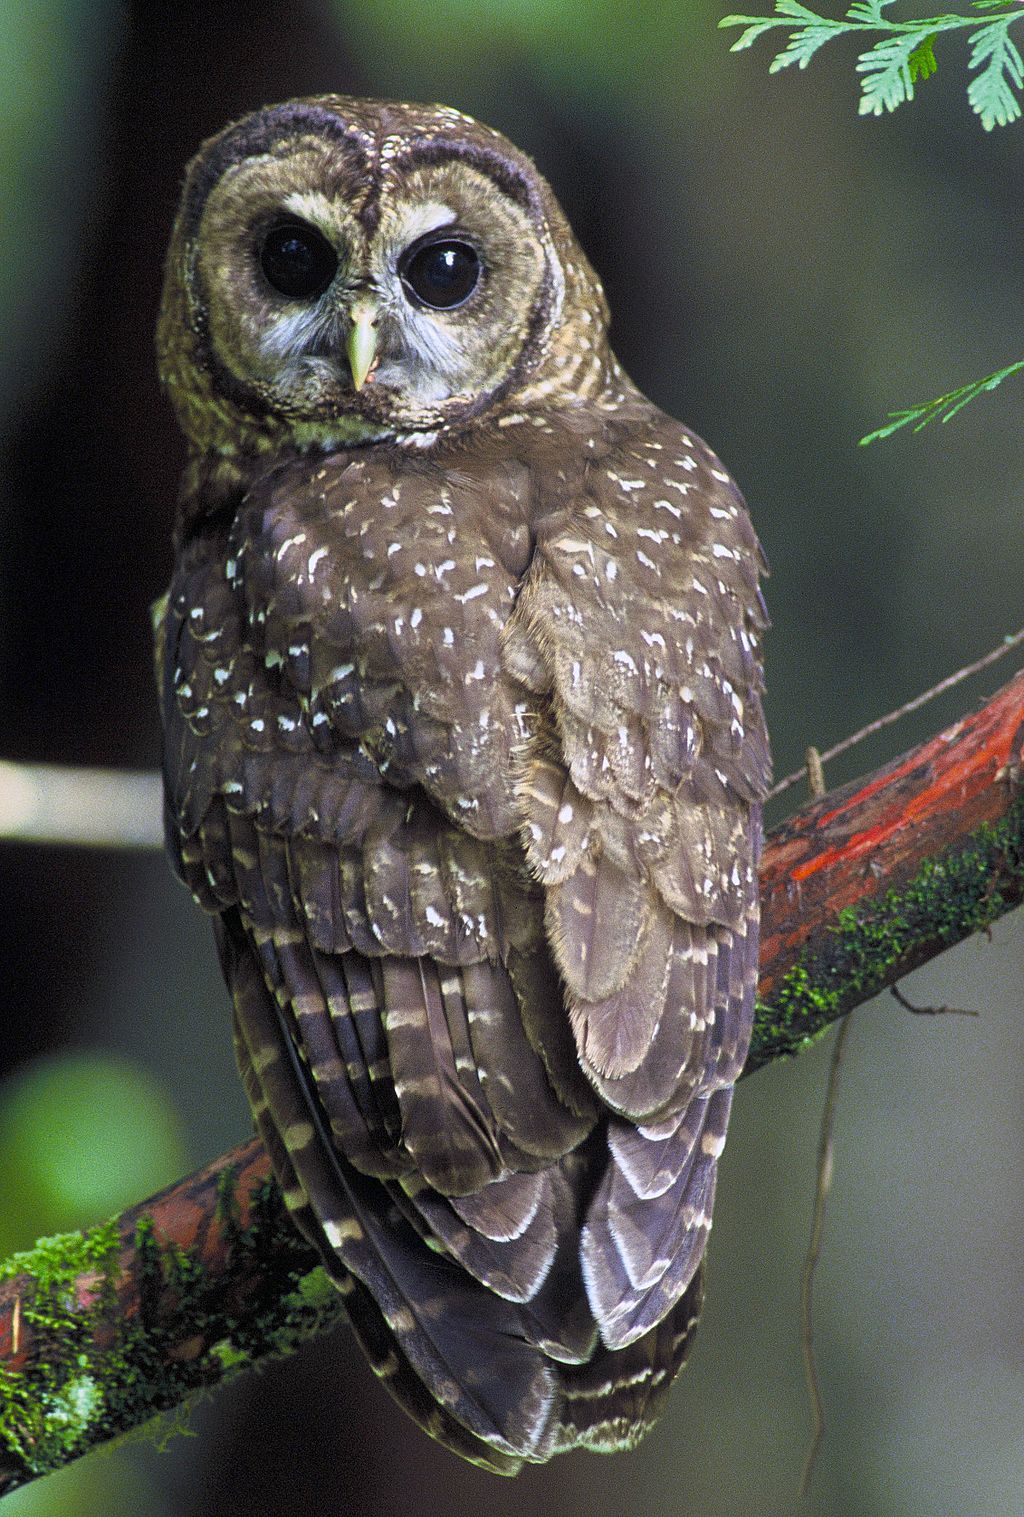 The Northern Spotted Owl